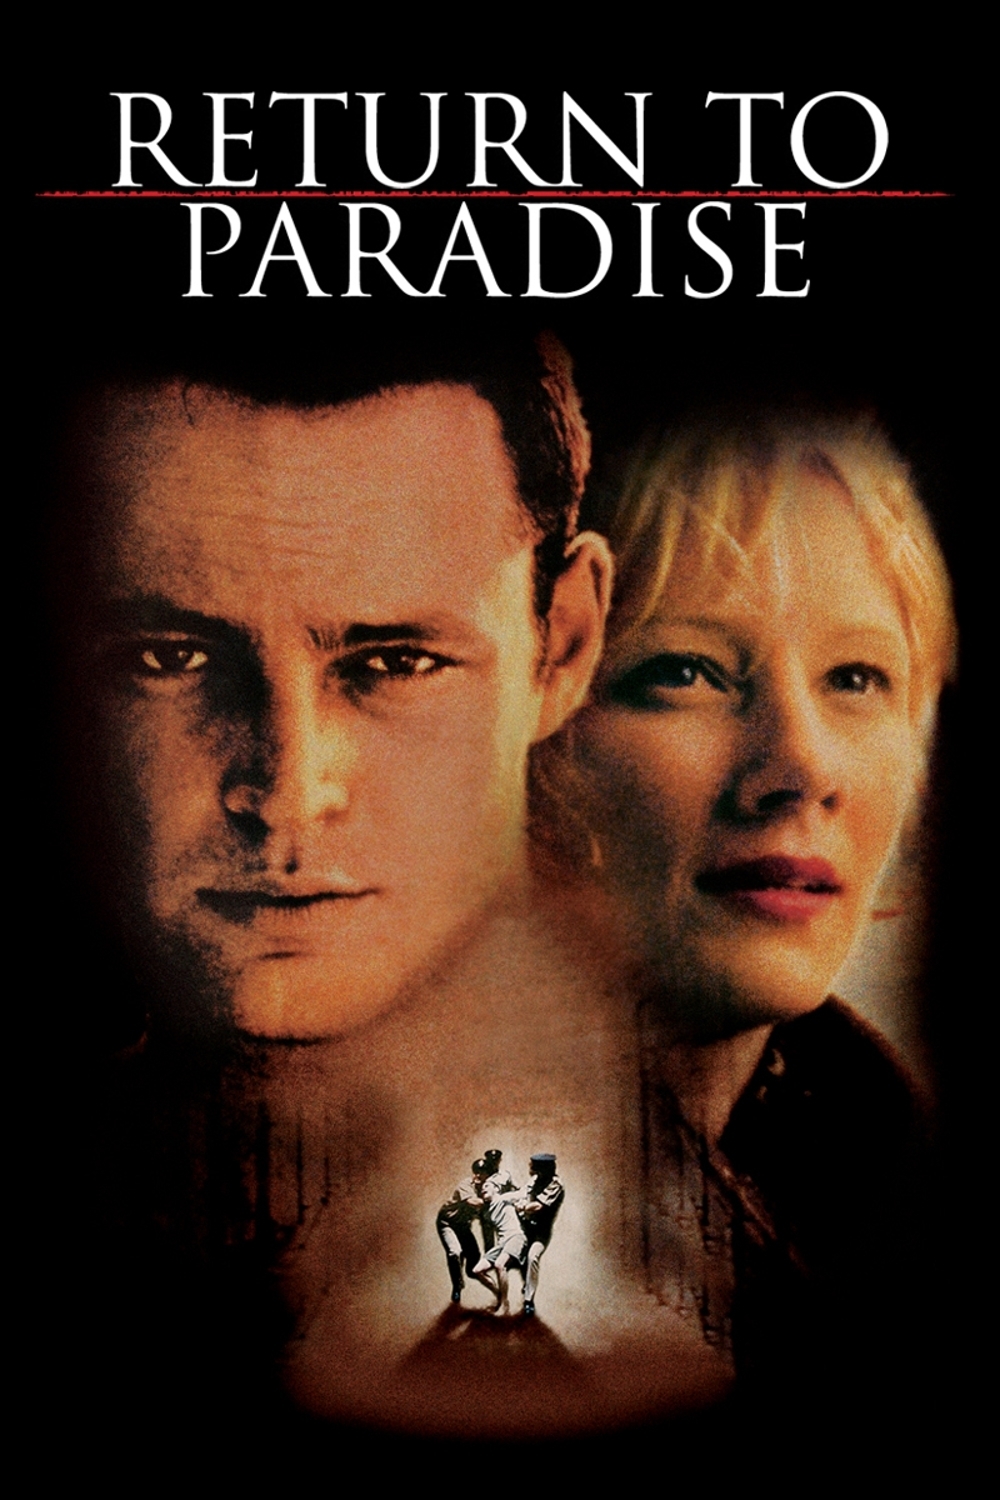 Poster for the movie "Return to Paradise"